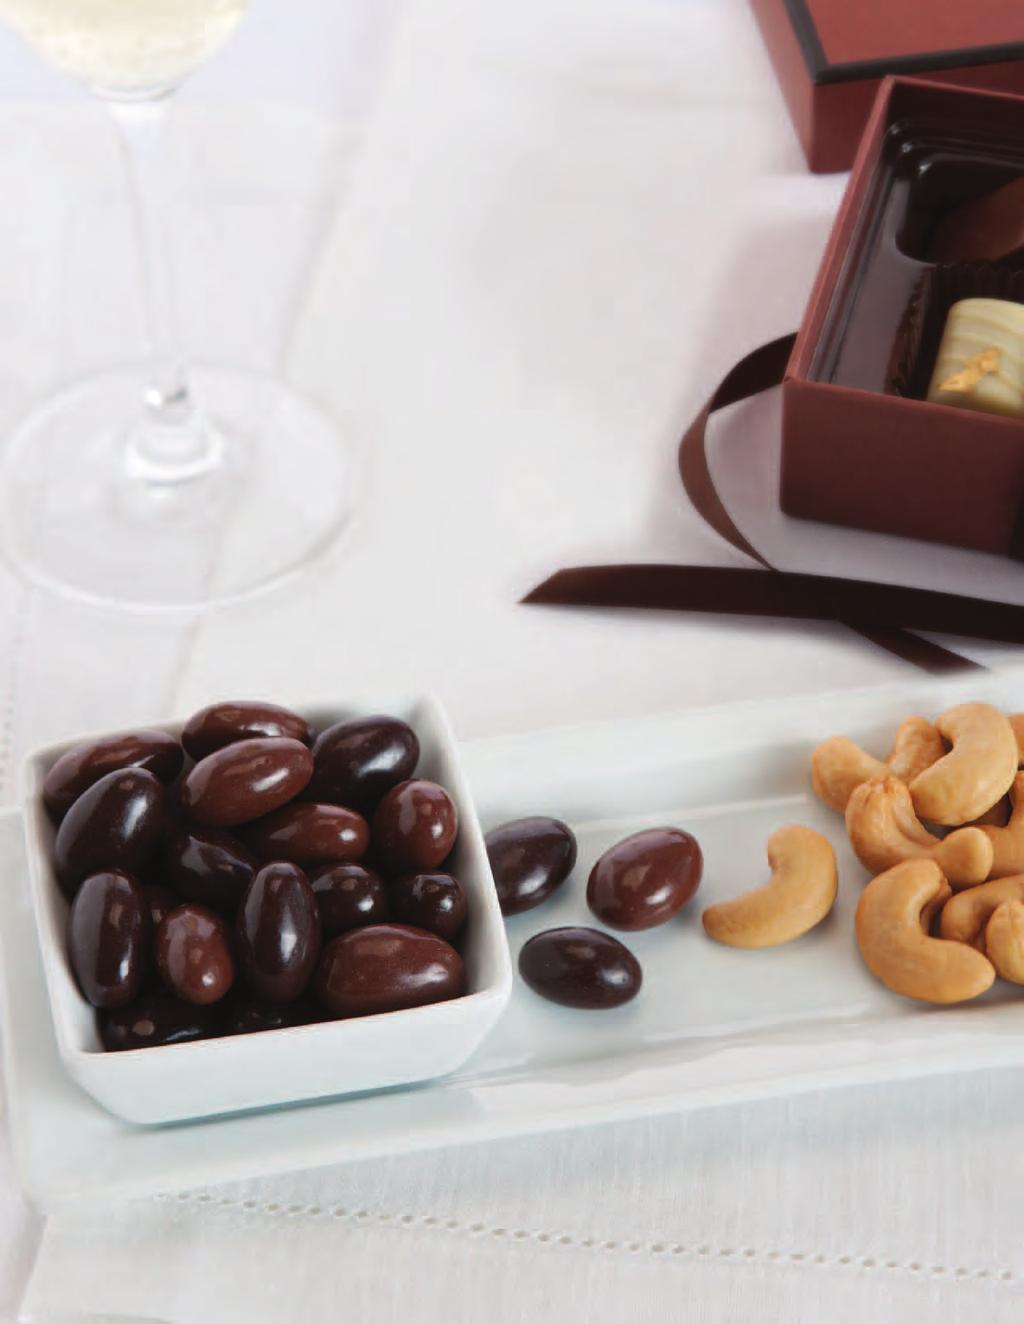 The open box is filled with our Chocolate All Berry Mix, Jumbo Cashews, Orange Cookies, Butter Shortbread Cookies, Jumbo